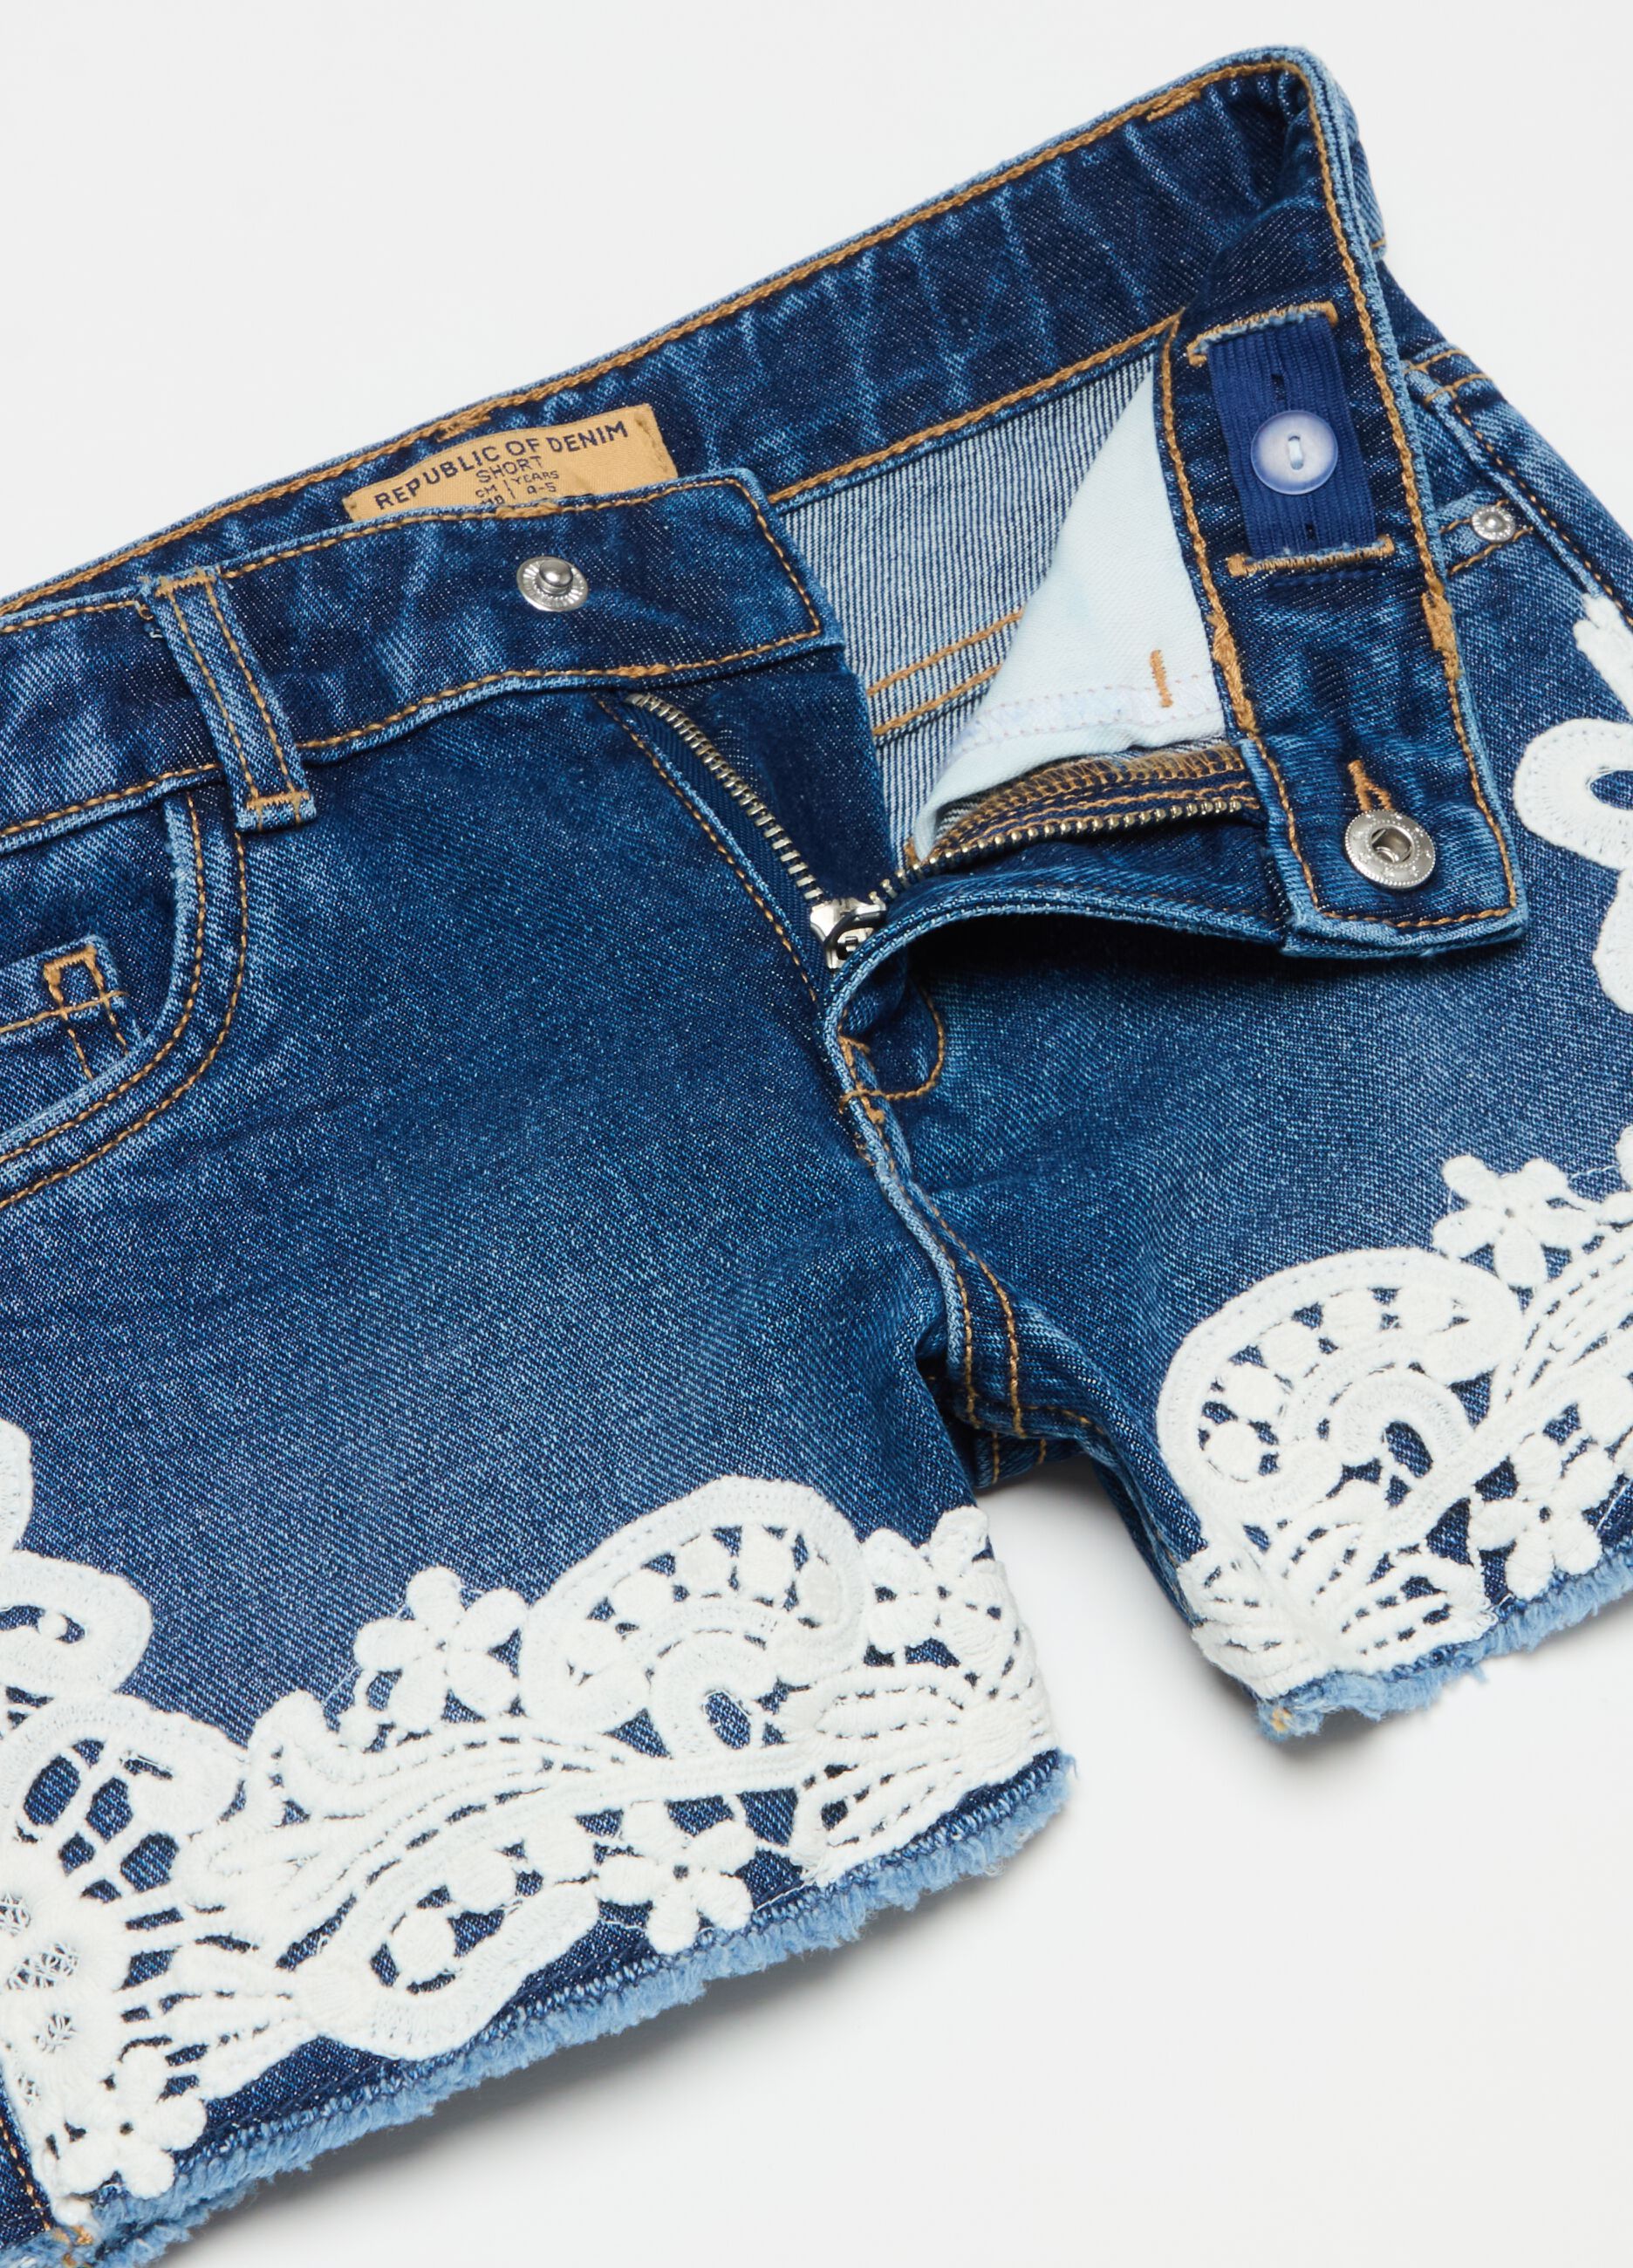 Denim shirts with broderie anglaise application